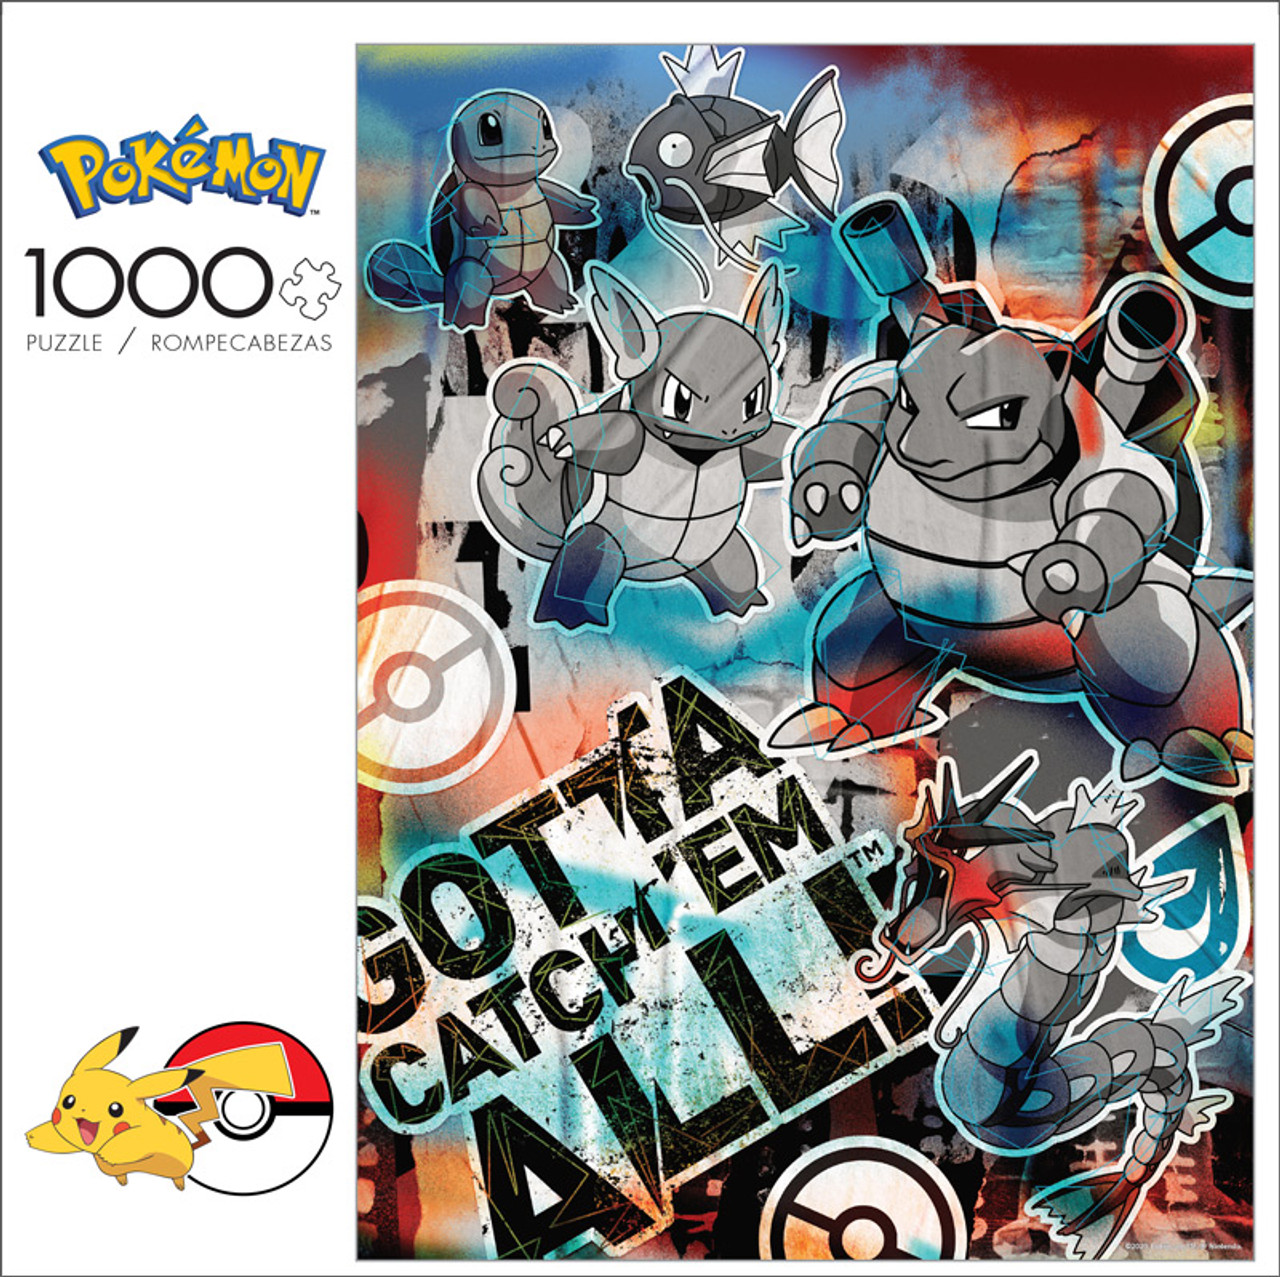 1000 Ravensburger Pokémon Puzzle. It is now in a poster frame on my wall. :  r/Jigsawpuzzles